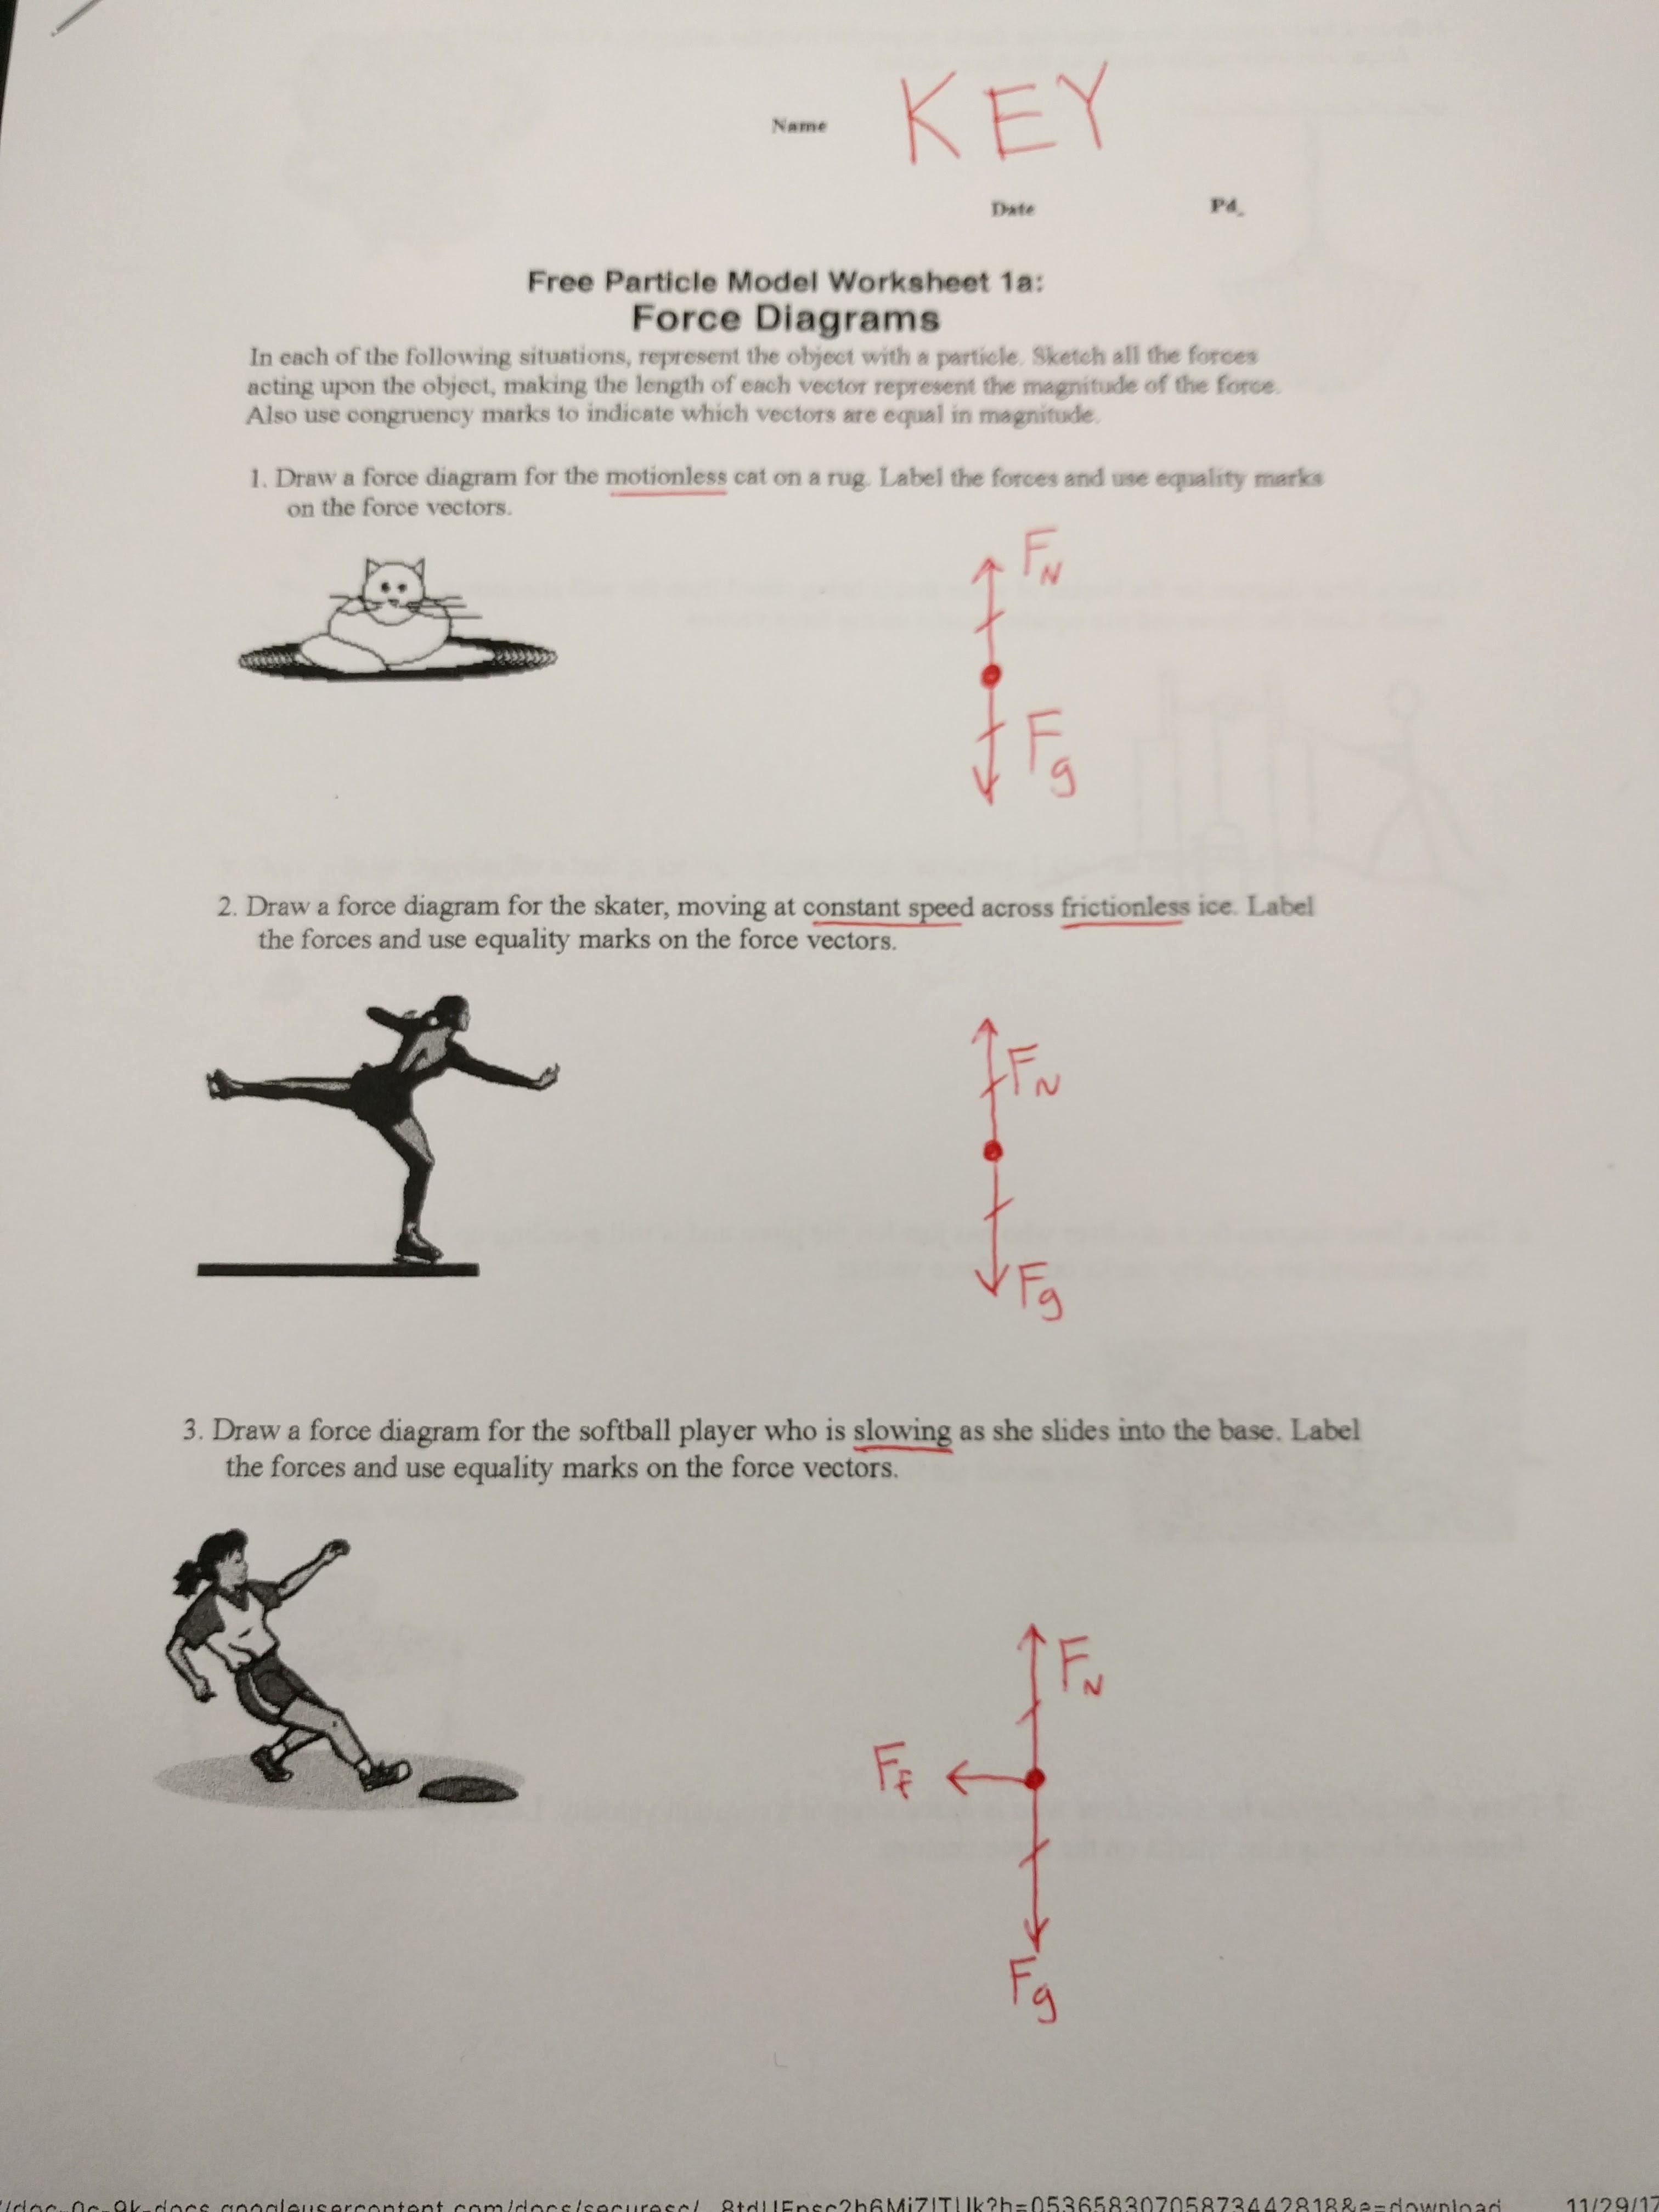 Free Body Diagram Worksheet Answers Lovely Free Body Diagram Worksheet with Answers the Best